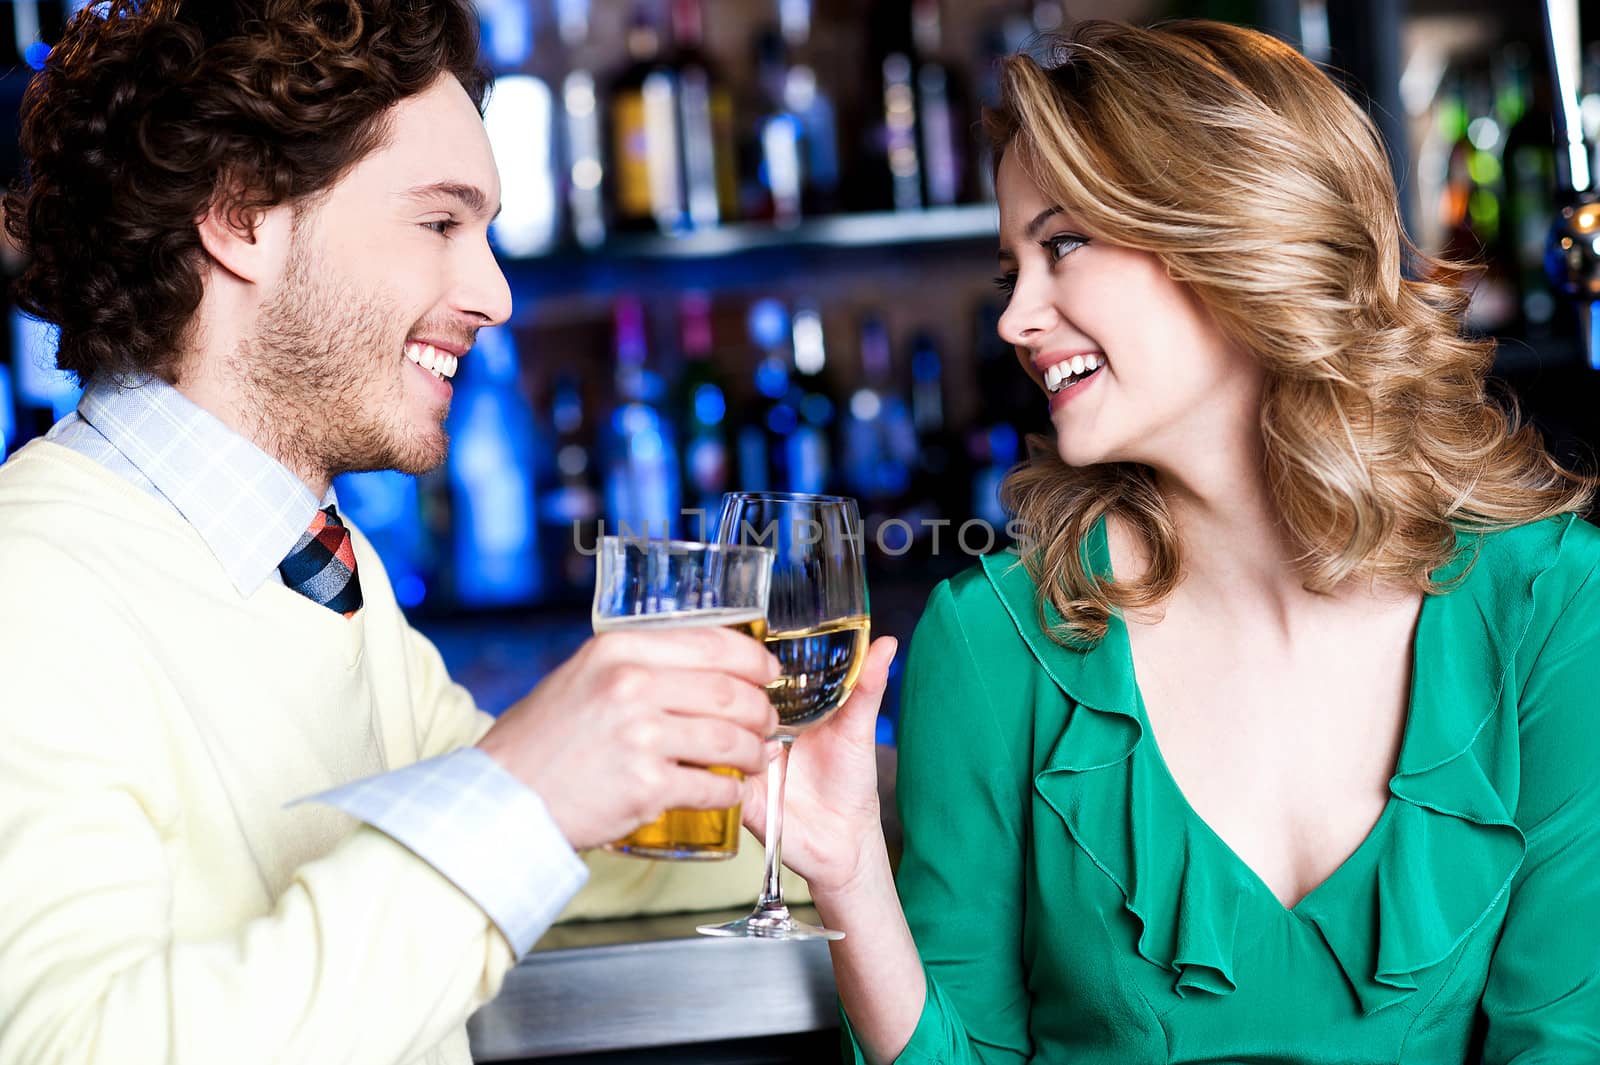 Cheerful two friends celebrating their drink in a bar